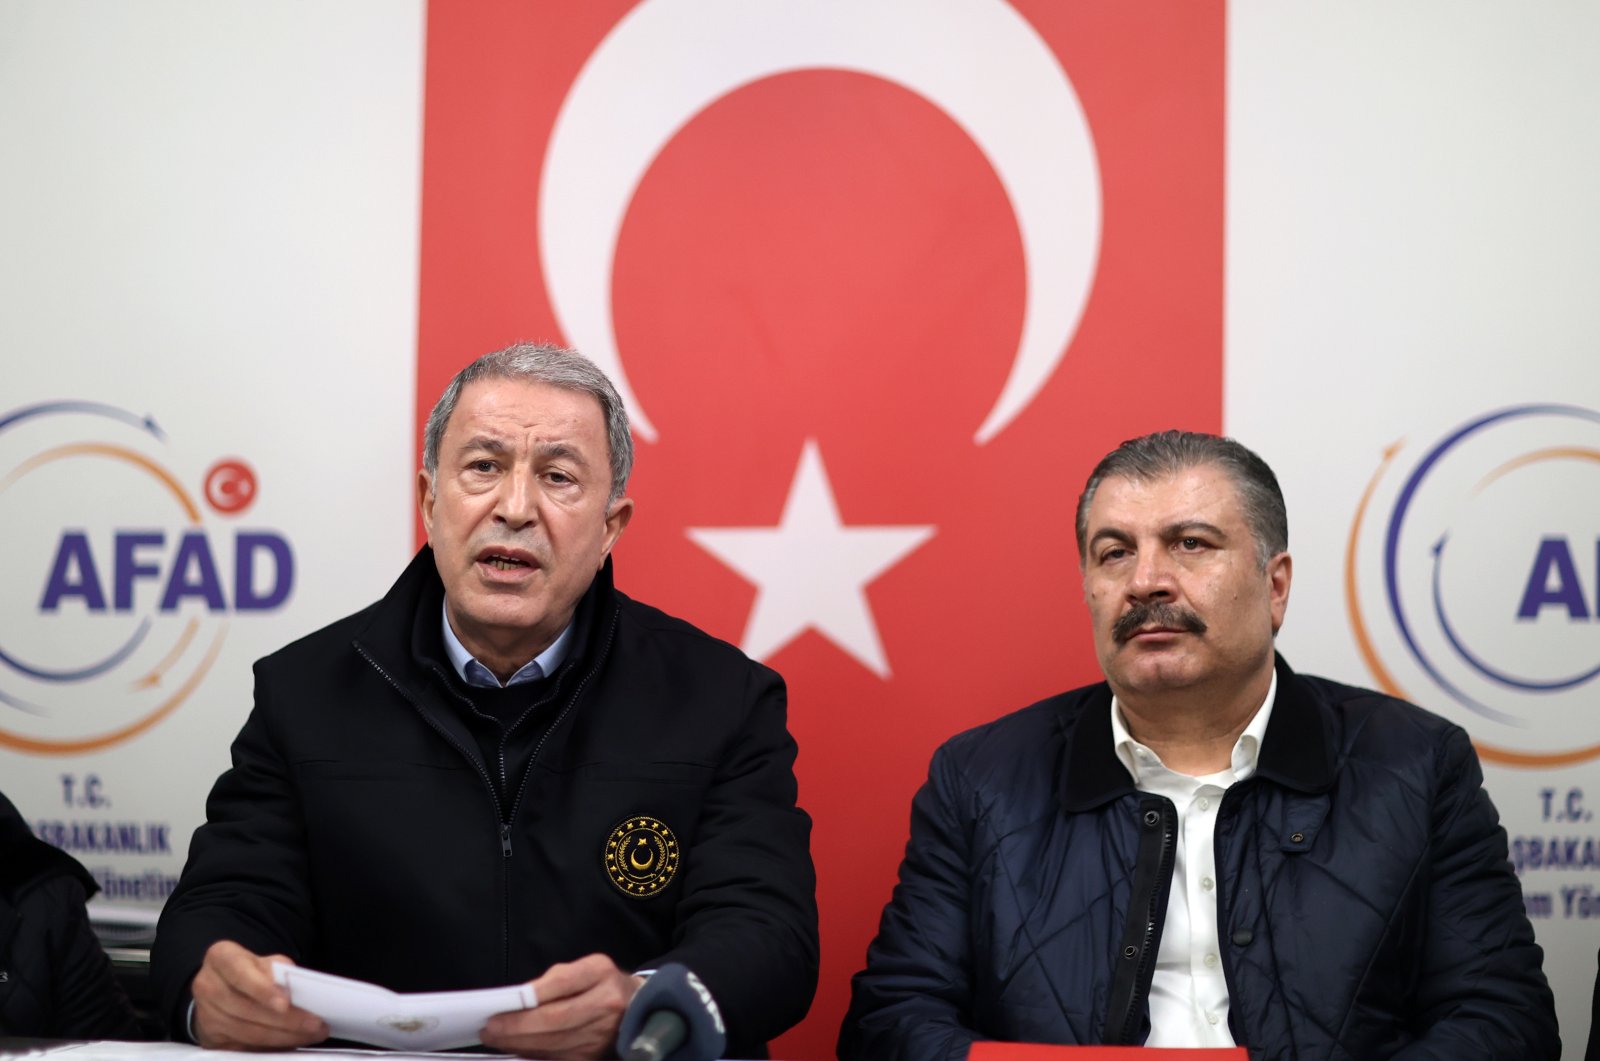 Defense Minister Hulusi Akar and Health Minister Fahrettin Koca attend a joint news conference in Hatay, Tuesday, Feb. 7, 2023. (AA Photo)